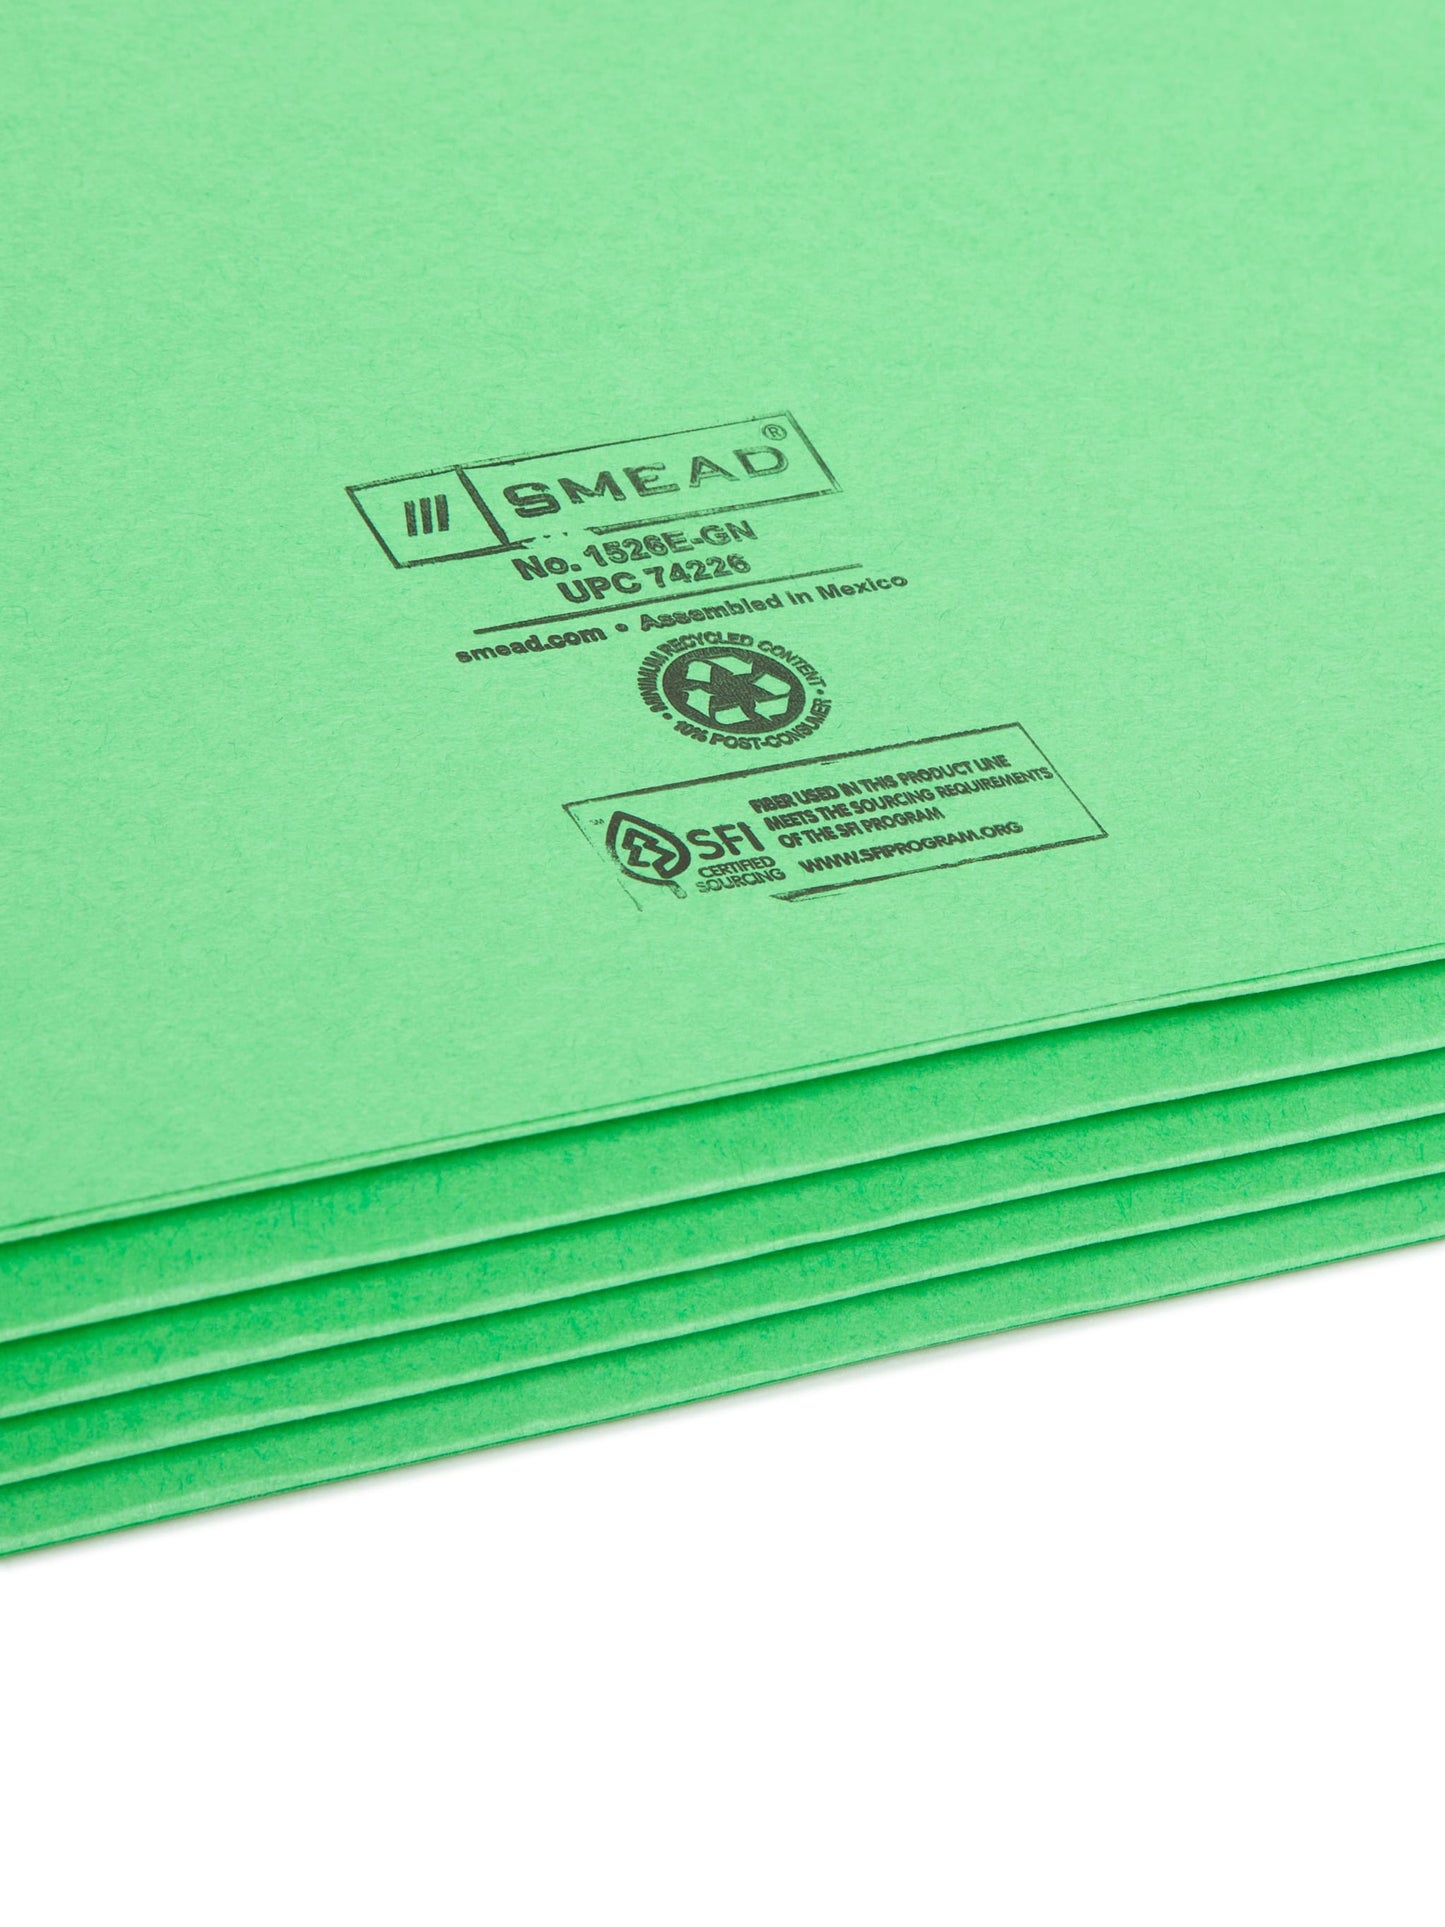 File Pockets, 3-1/2 inch Expansion, Straight-Cut Tab, Green Color, Legal Size, Set of 0, 30086486742260